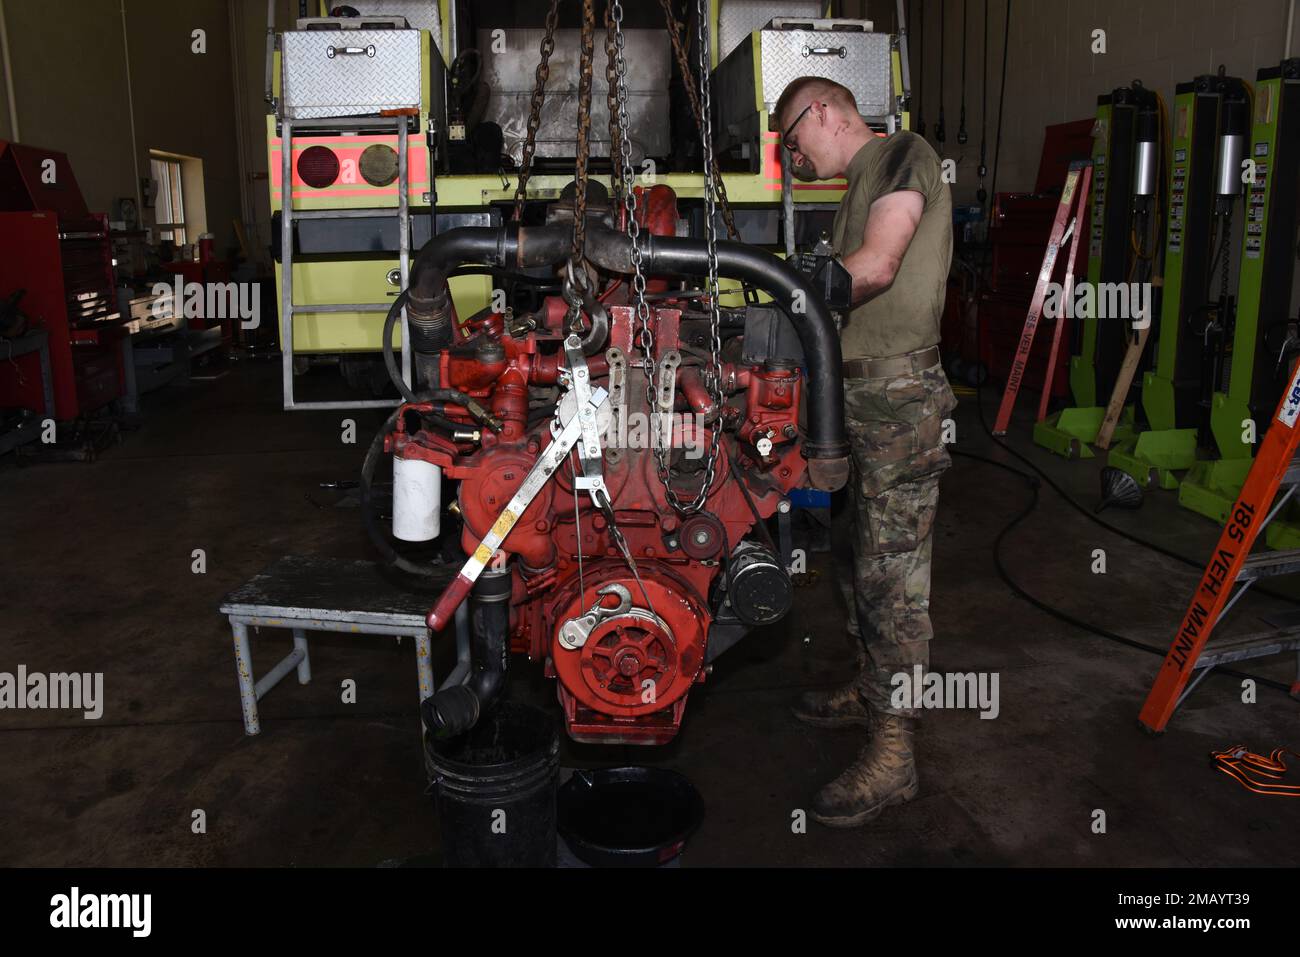 185th Air Refueling Wing vehicle mechanic Technical Sgt. Jason Lammers works on an 8 cylinder Detroit Diesel engine after removing it from the rear of a 1996 Teledyne P23 “Crash Truck” at the 185th Air Refueling Wing vehicle maintenance shop in Sioux City, Iowa on June 8, 2022. 185th ARW mechanics are overhauling the engine because it had developed an internal coolant leak.    U.S. Air National Guard photo Senior Master Sgt. Vincent De Groot Stock Photo